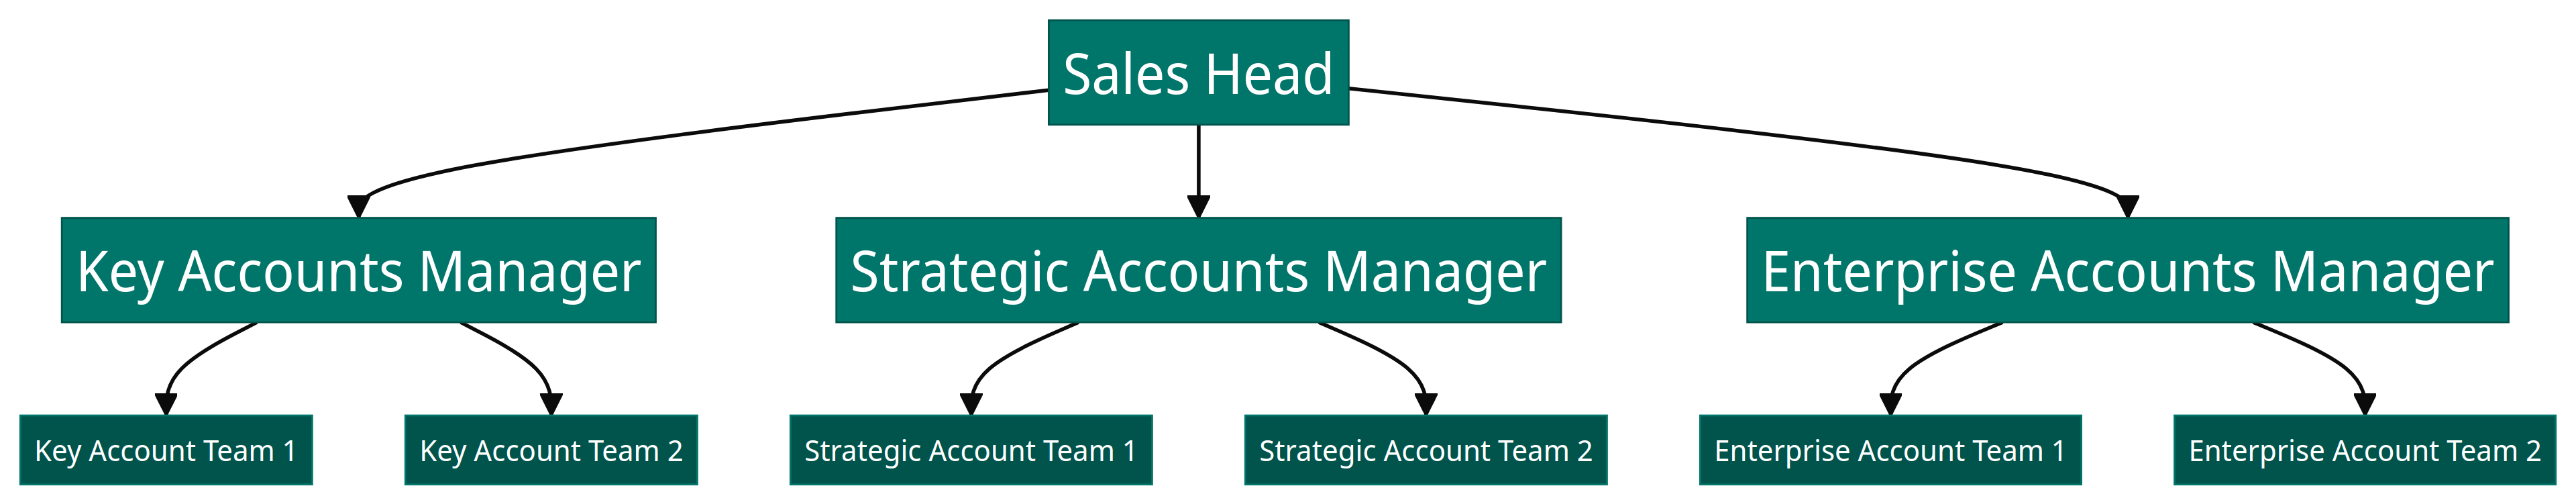 Account-based sales team structure